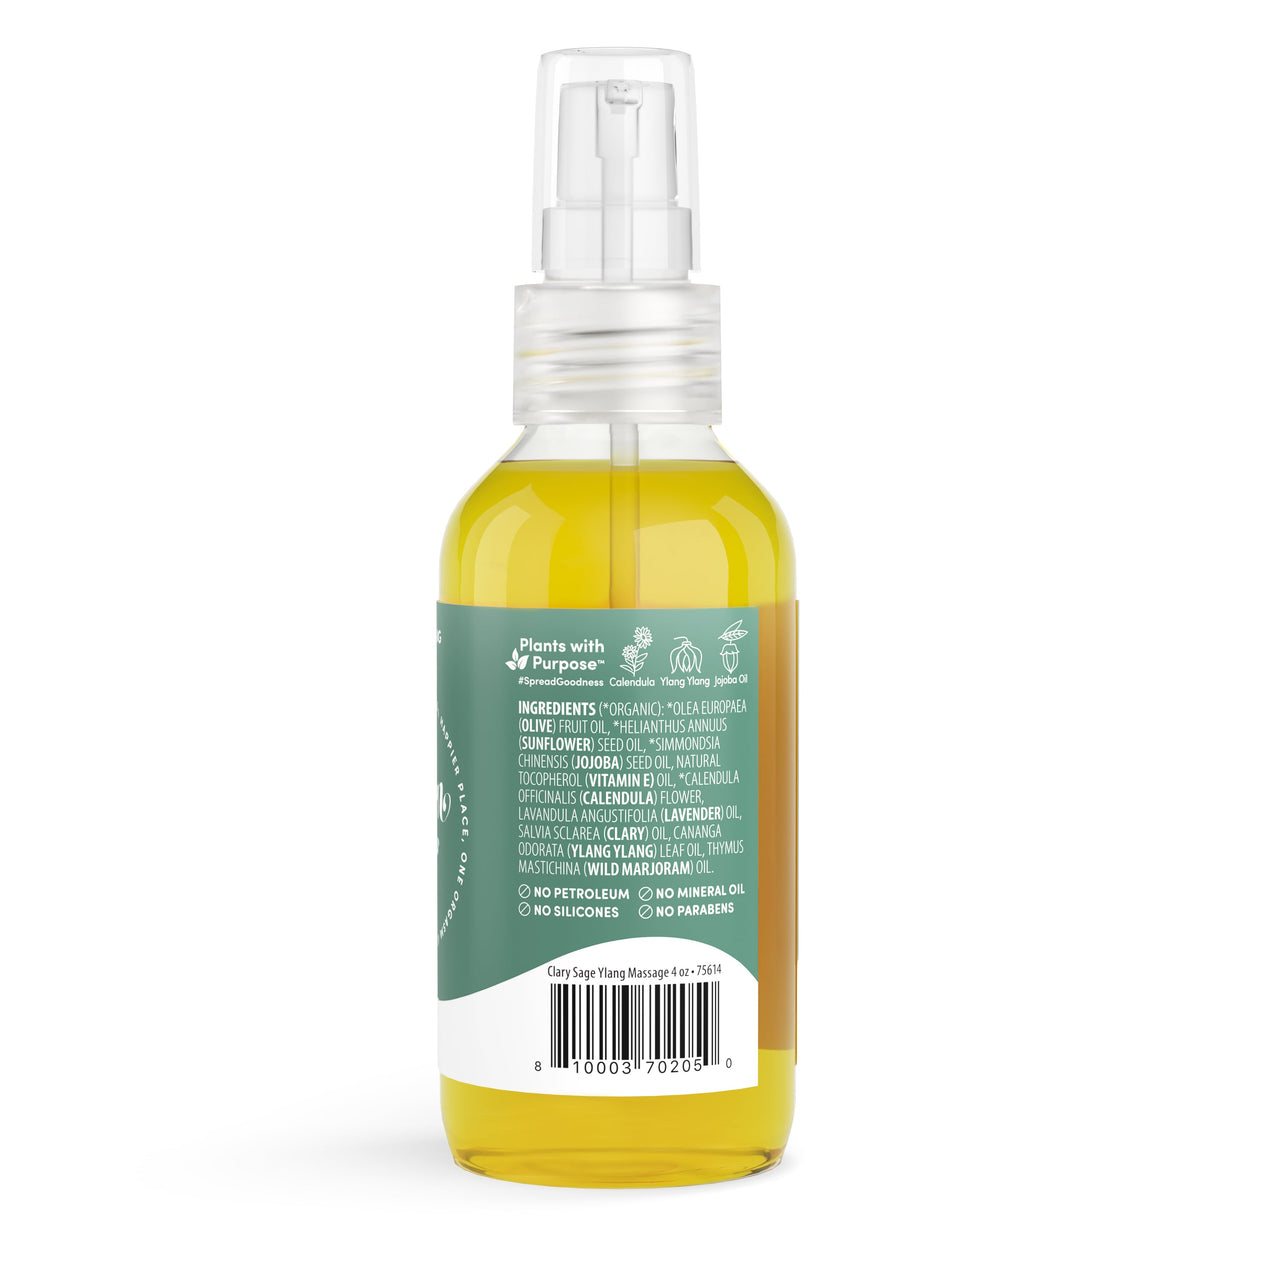 Massage Oil - Clary Sage + Ylang Ylang - Shortdated Deal